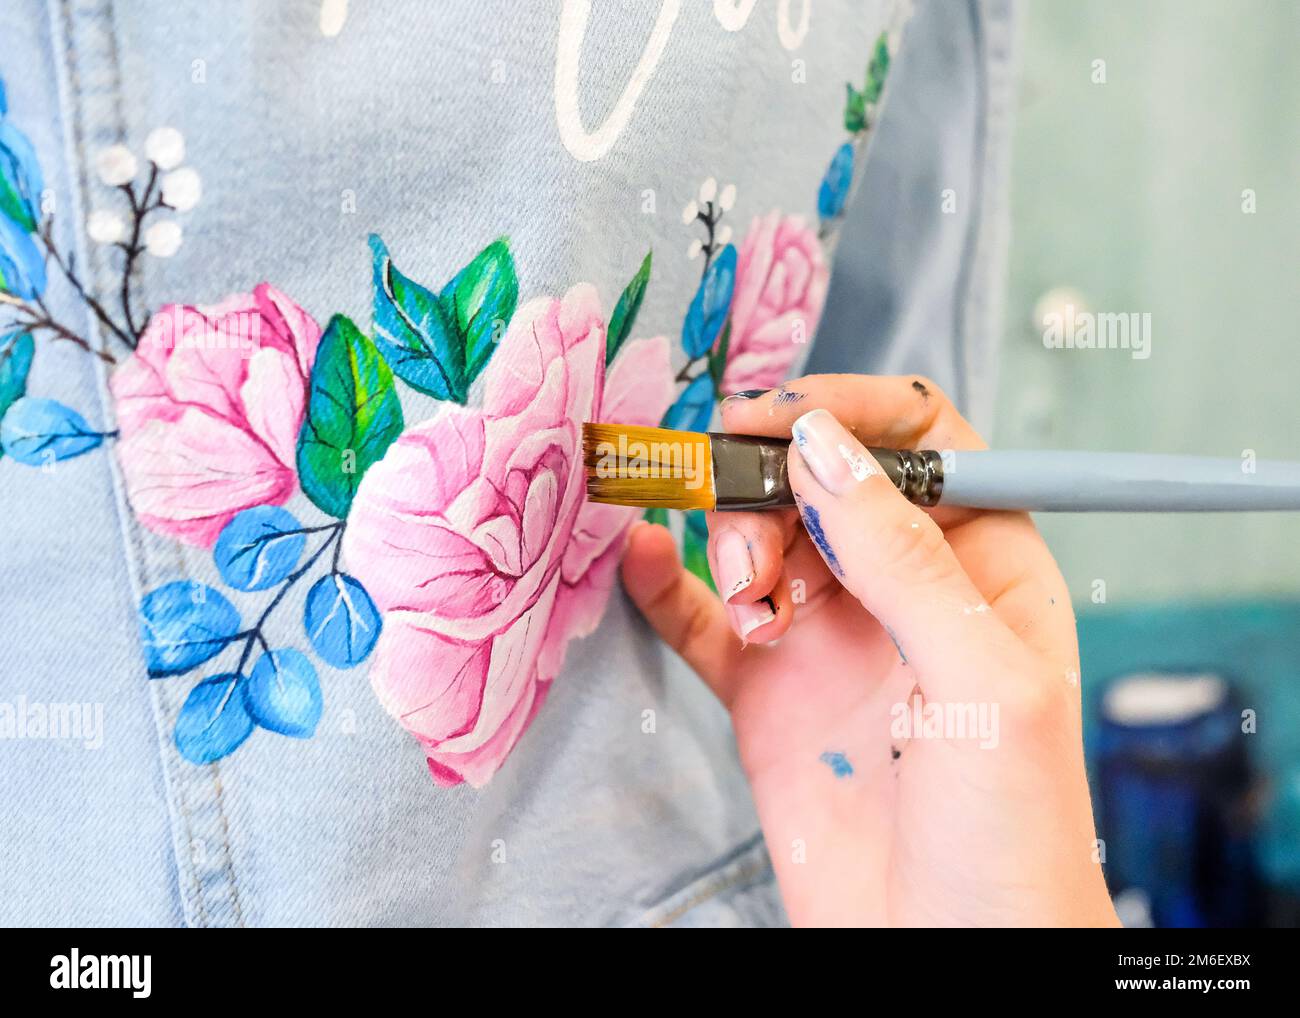 Painting flowers on a denim jacket. Details Stock Photo